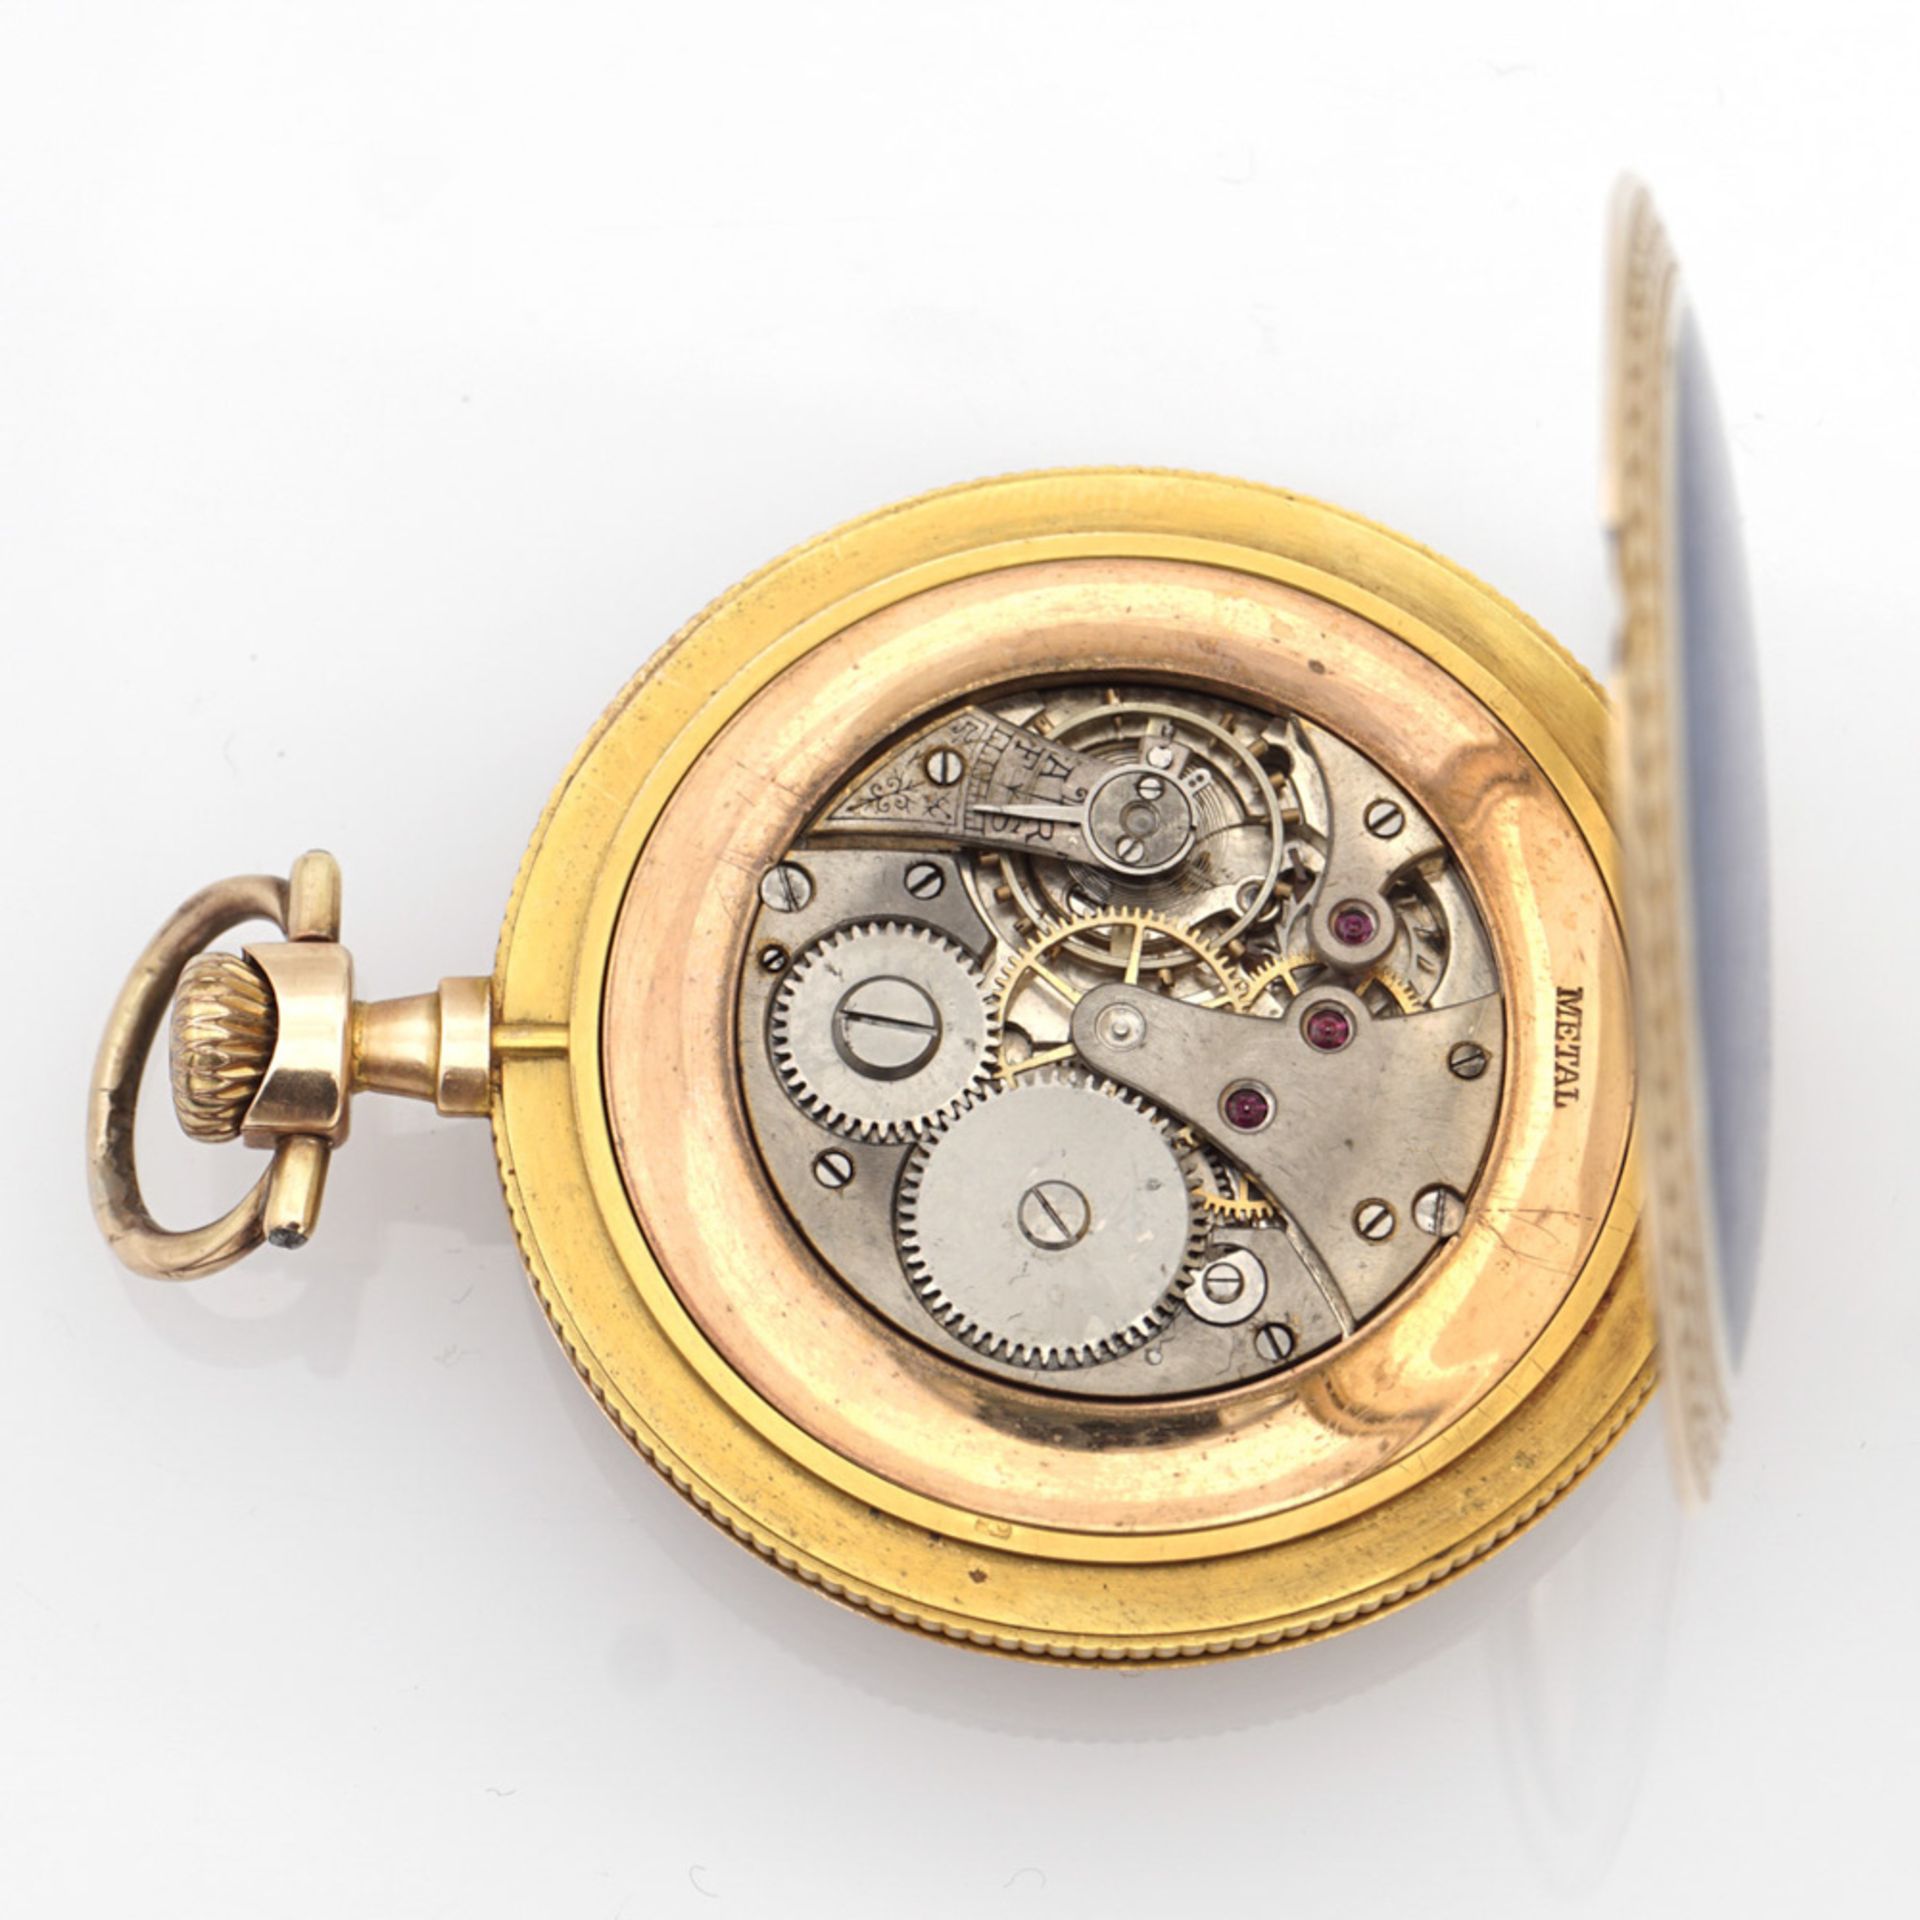 Tavannes Watch, pocket watch early 20th century weight 55,5 gr. - Image 4 of 4